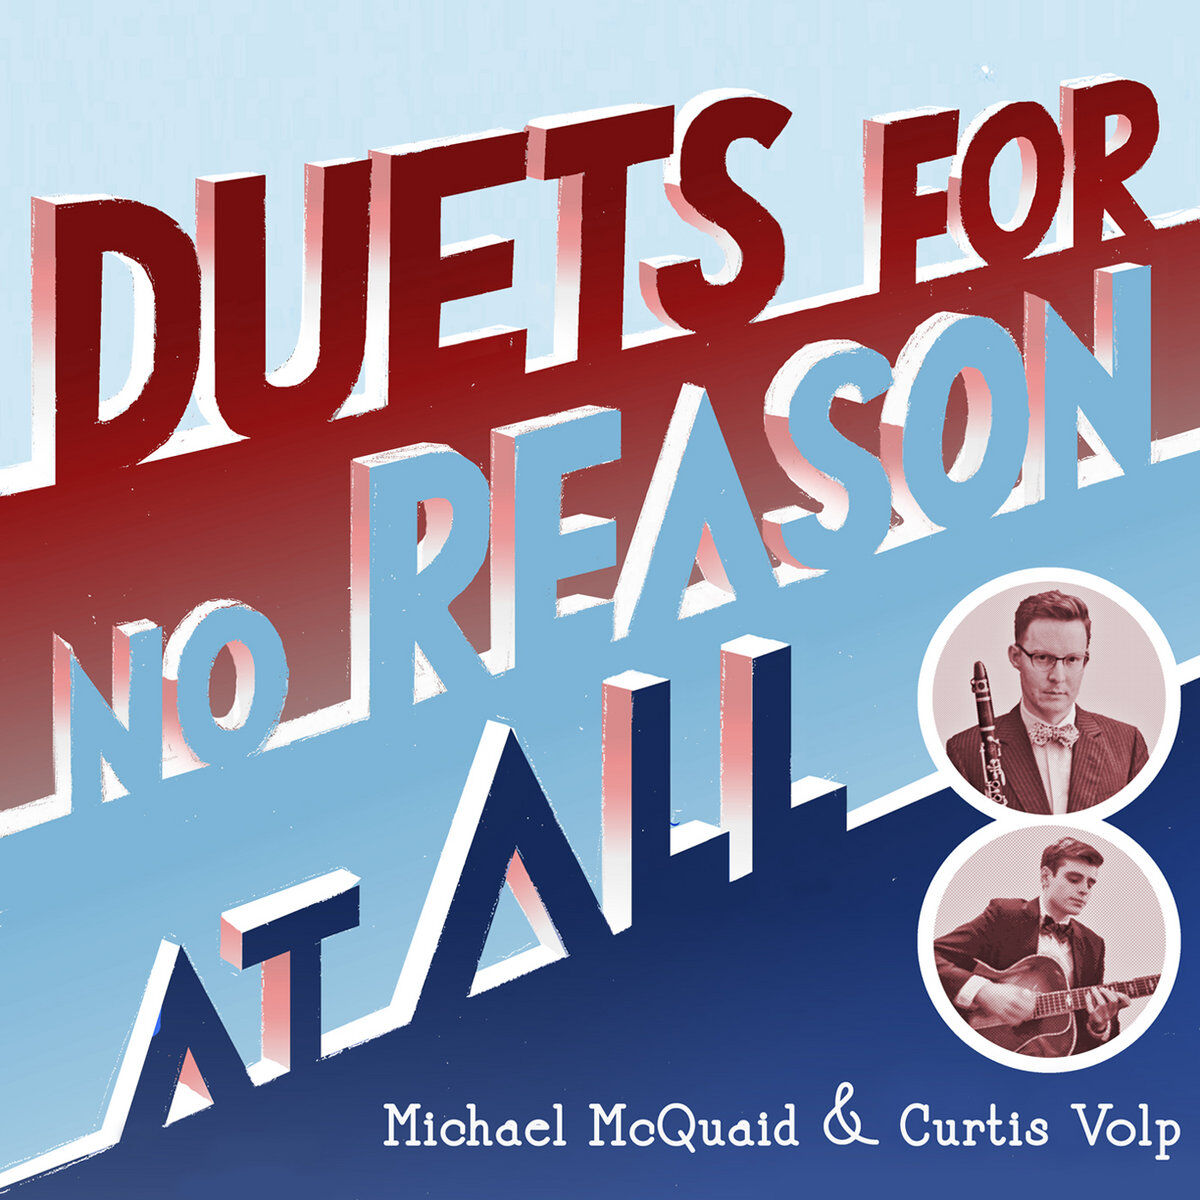 Michael McQuaid & Curtis Volp • Duets for No Reason at All